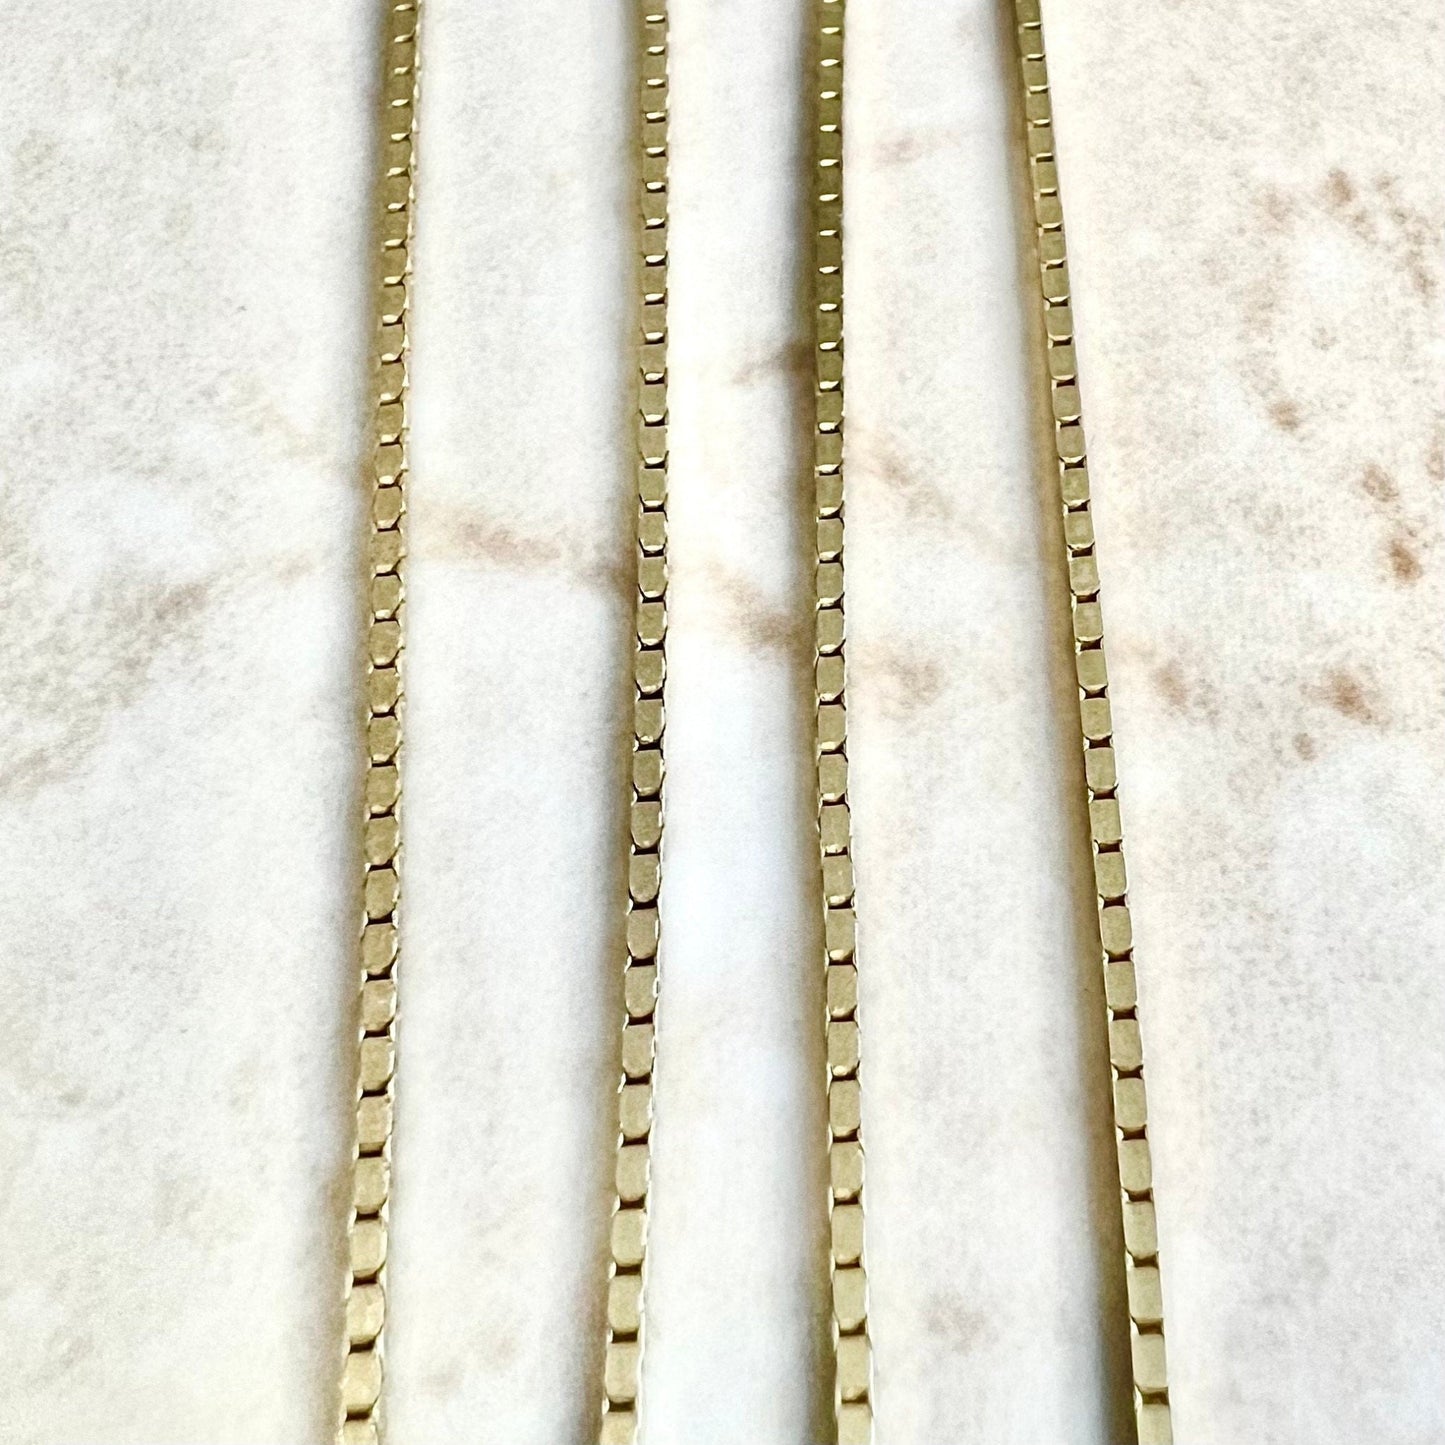 Vintage 14K Yellow Gold Box Chain Necklace - 18 Inch Gold Chain Necklace - 14K Yellow Gold Necklace - Christmas Gifts - Everyday Necklace